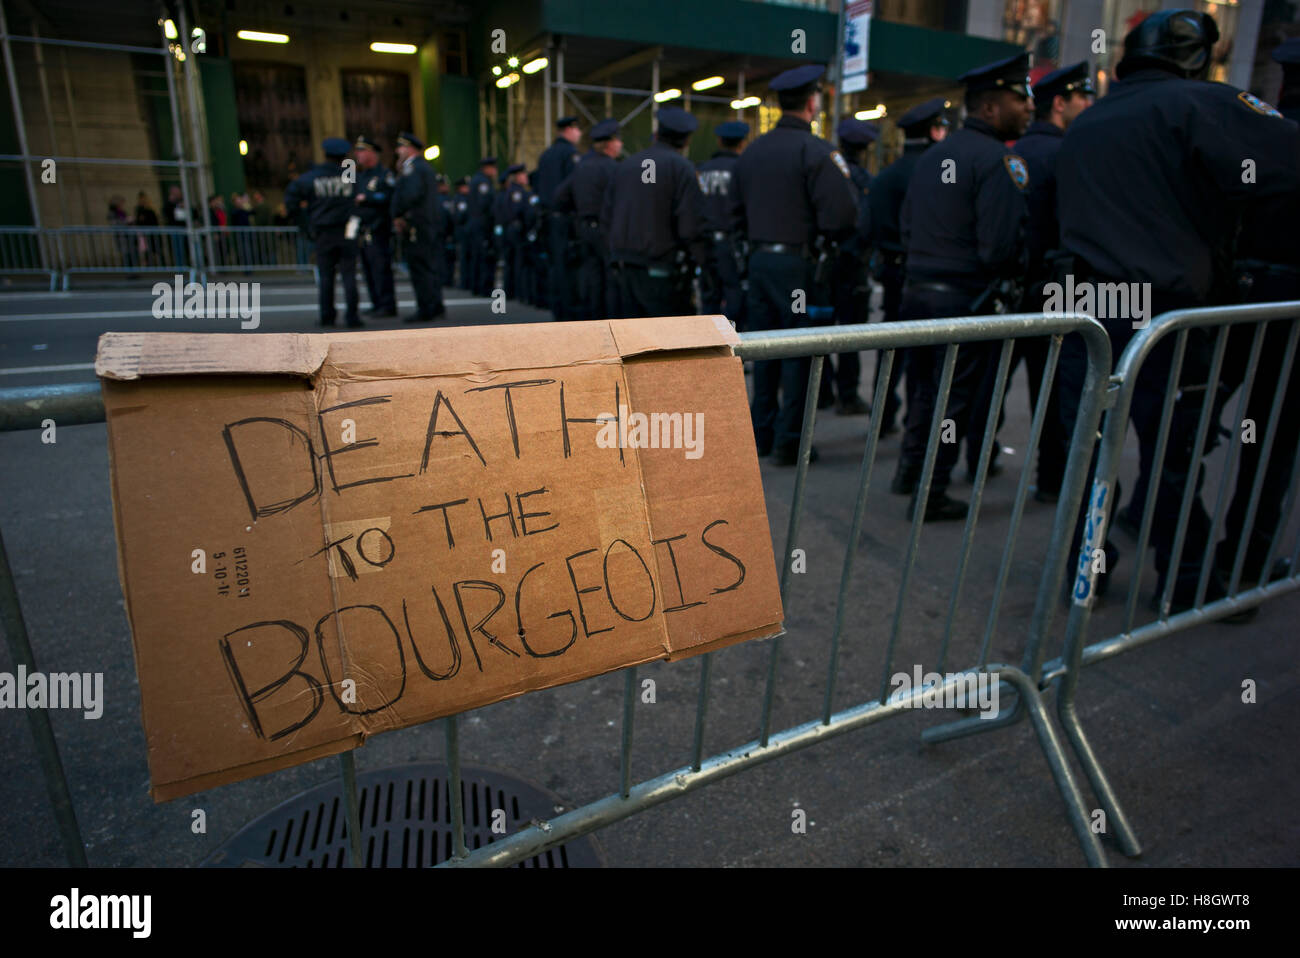 New York, USA. November 12, 2016. Sign reading 'death to the bourgeois' along route of march protesting against the election of Donald Trump as 45th president of the U.S. Credit:  Joseph Reid/Alamy Live News Stock Photo